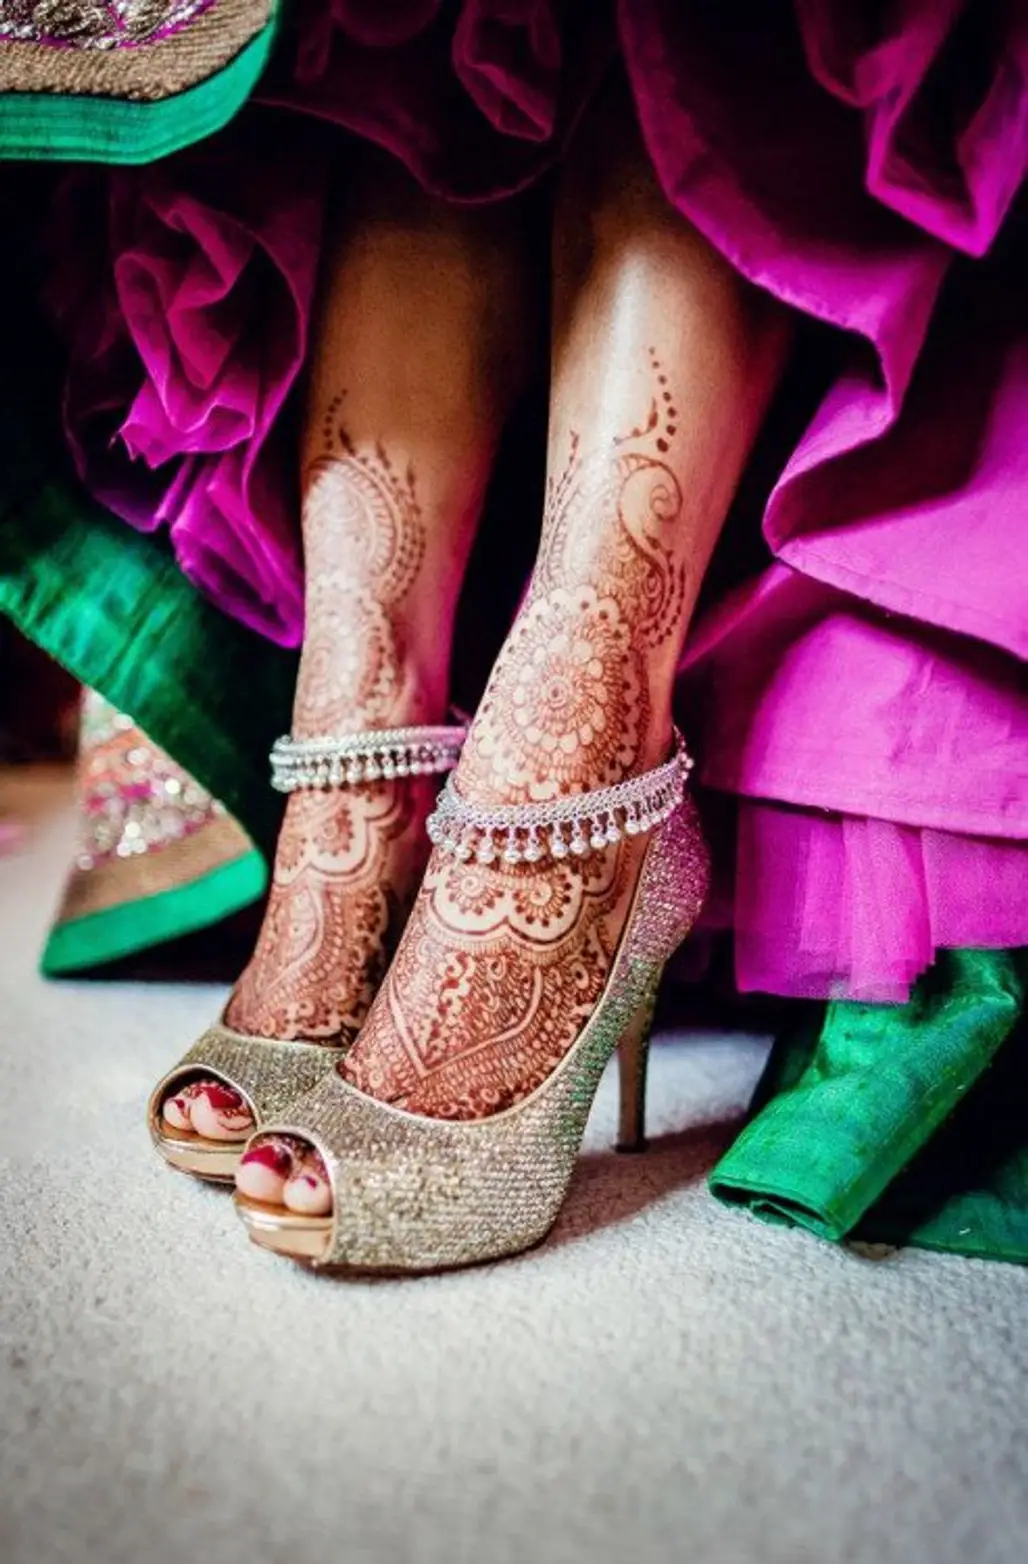 With Stunning Anklets and Sparkly Shoes